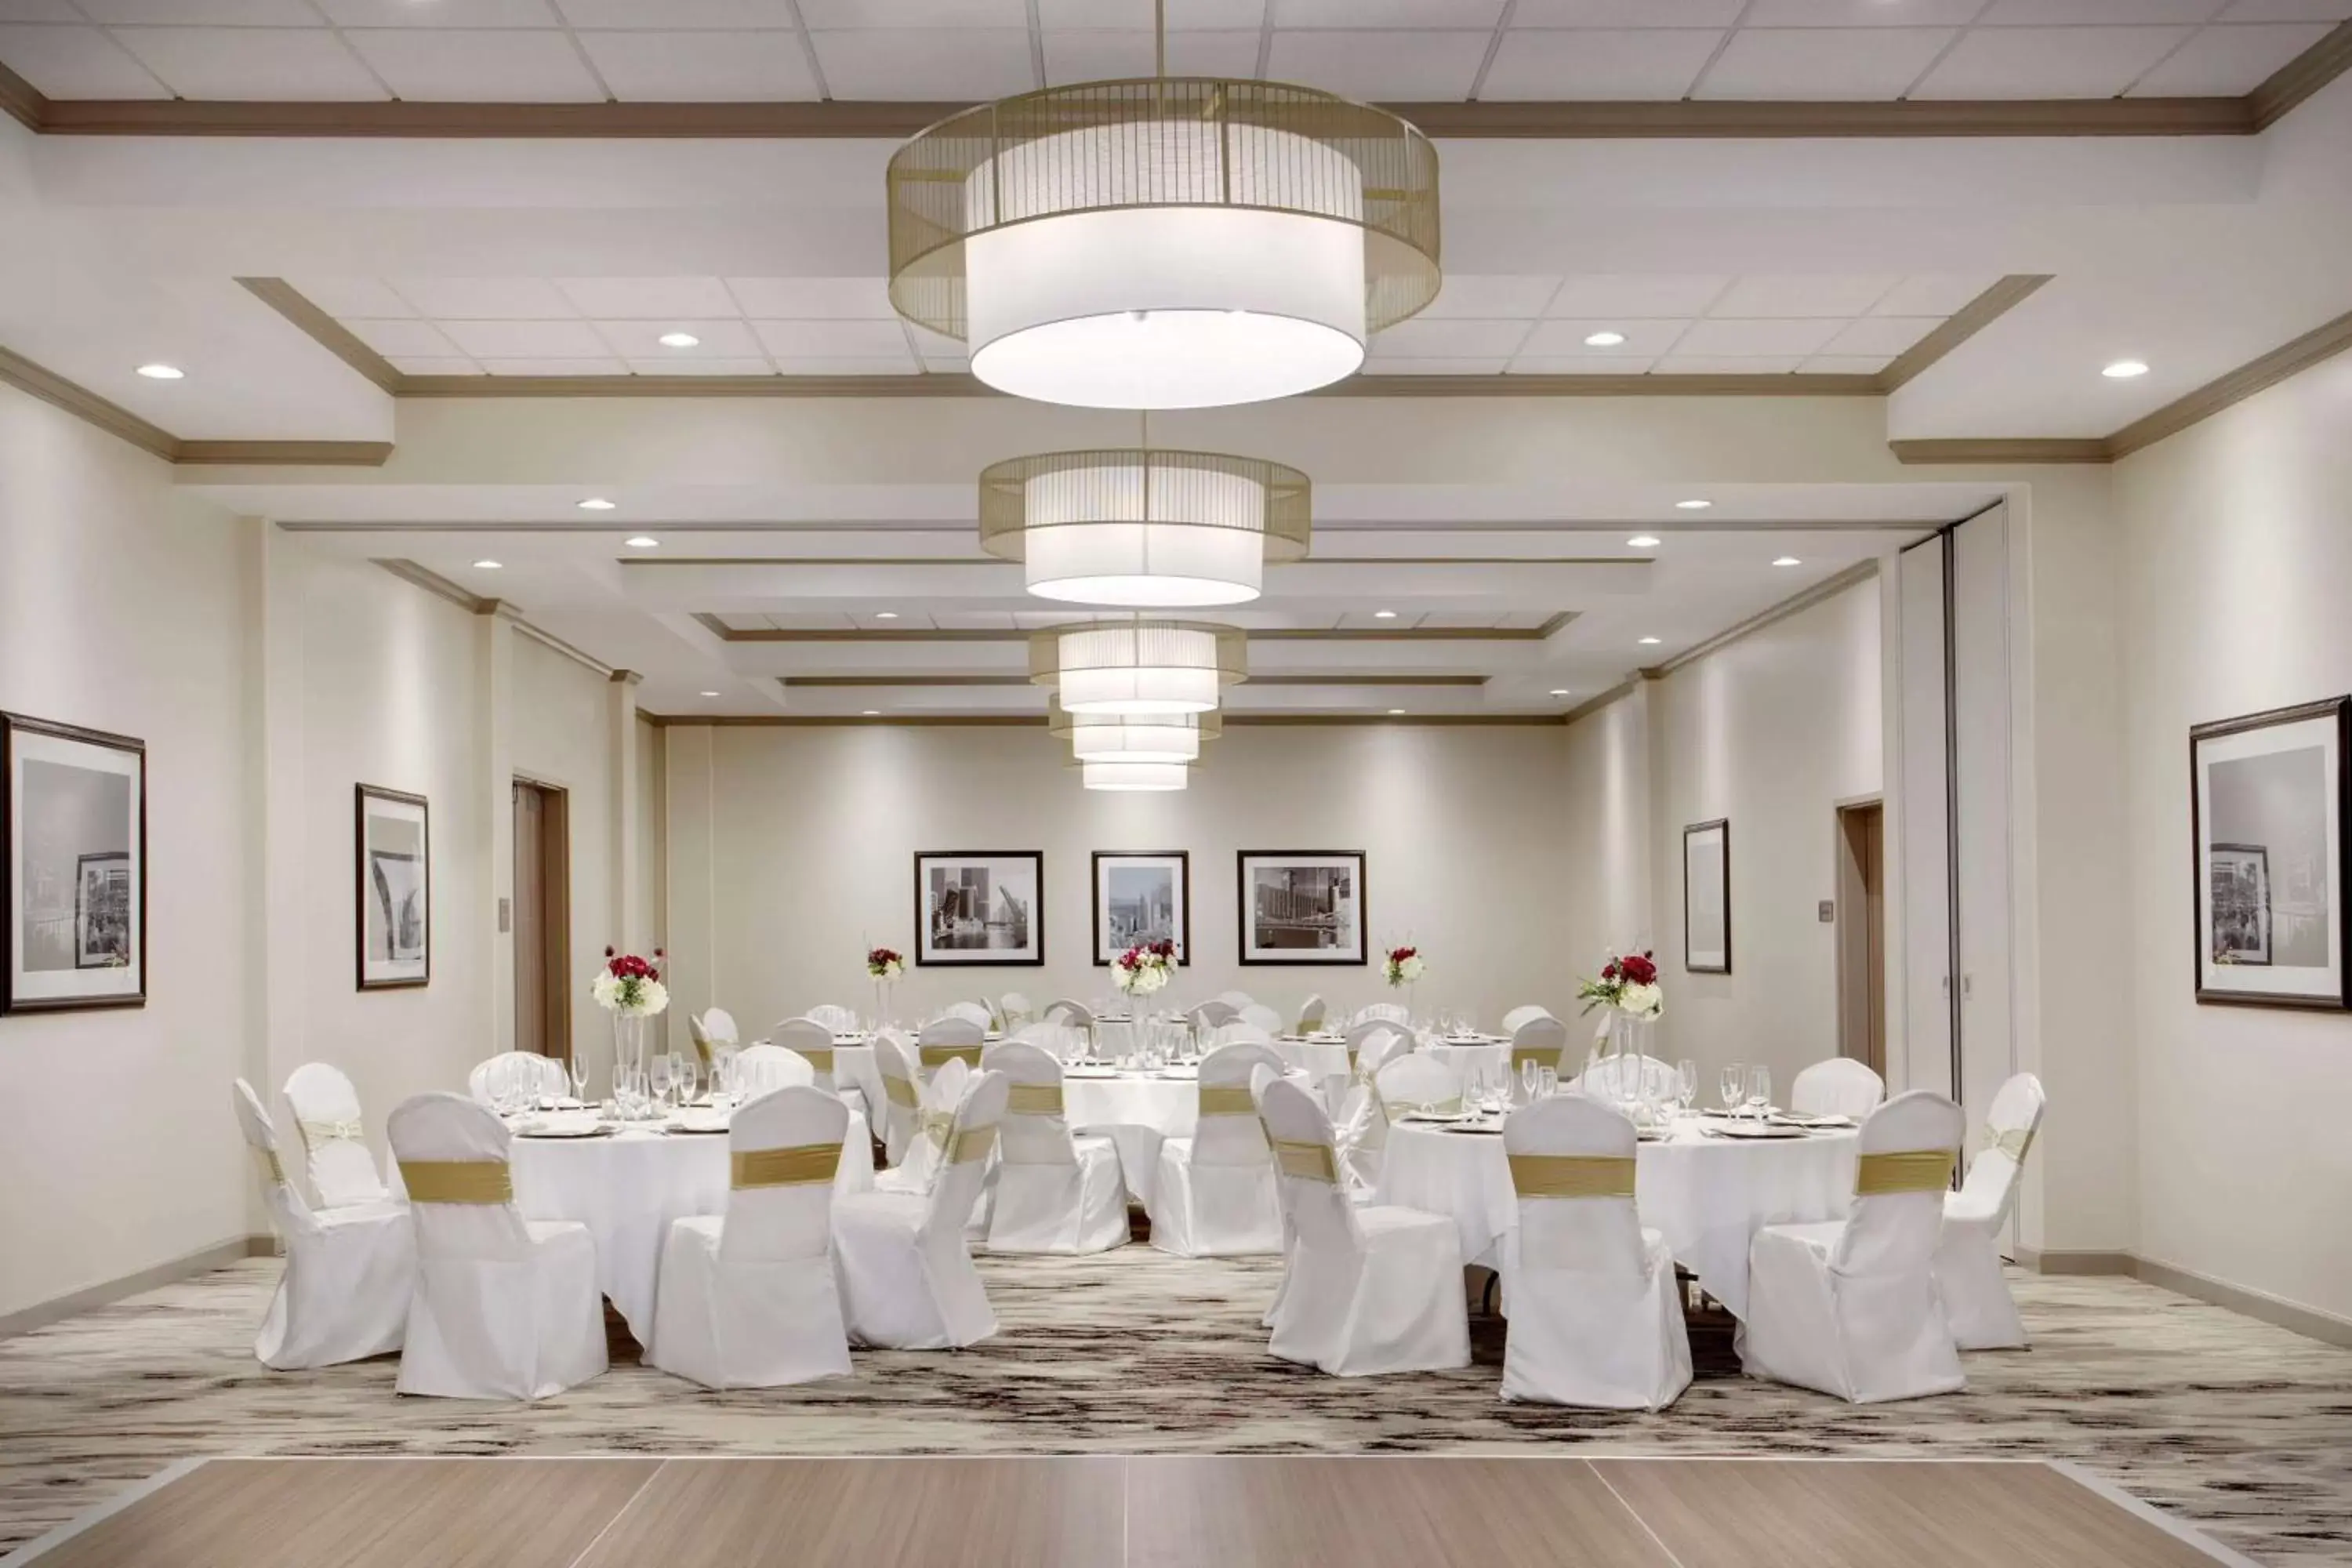 Meeting/conference room, Banquet Facilities in DoubleTree by Hilton Chicago Midway Airport, IL